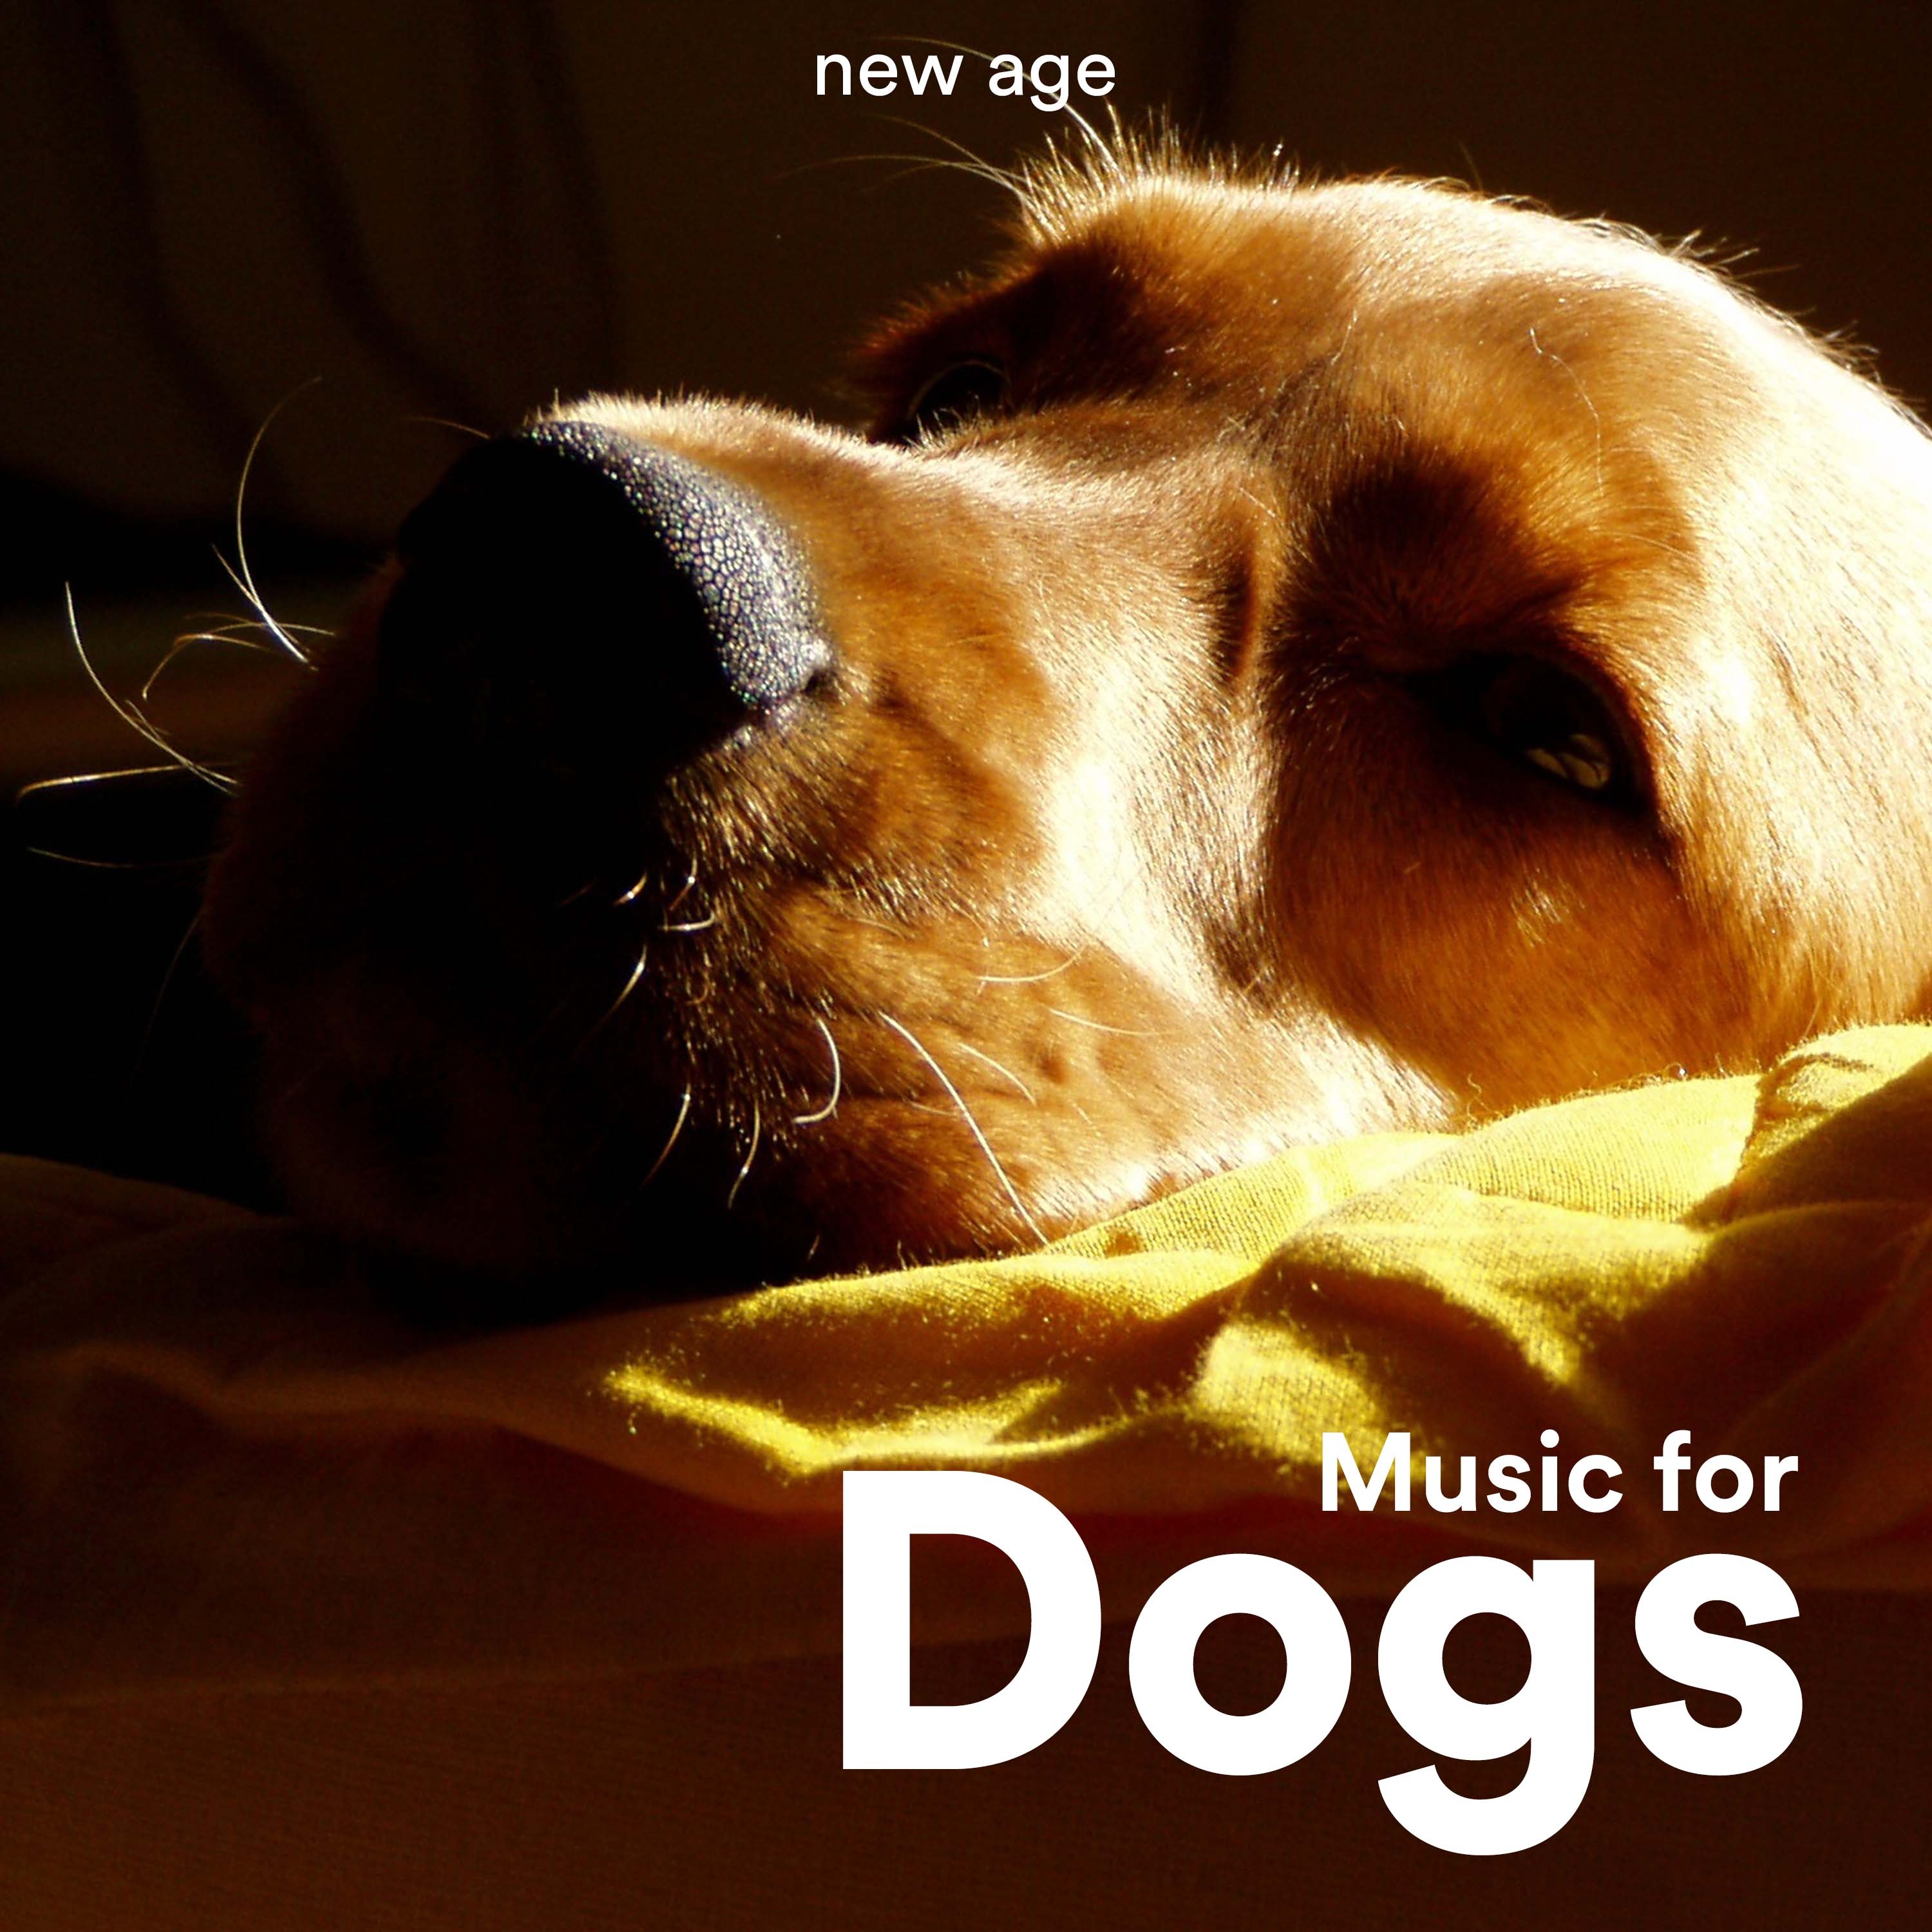 Music for Dogs: Relaxing Music for Dogs